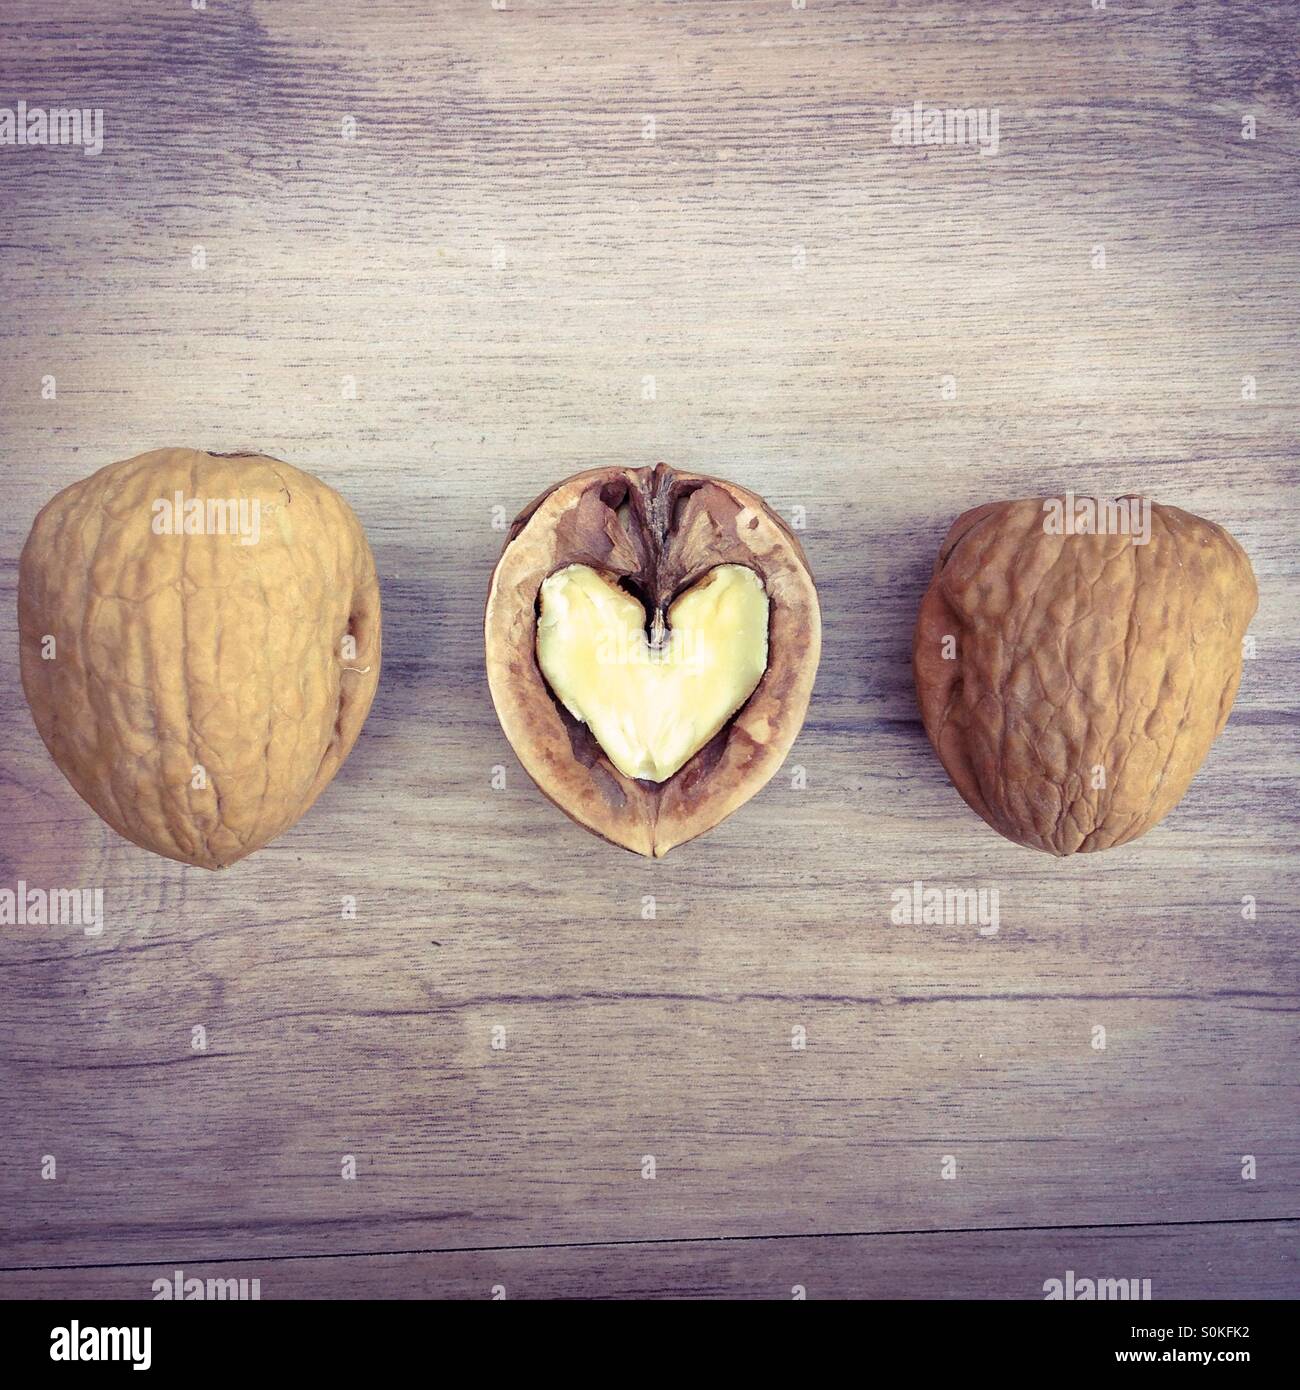 Three nuts in a row. The one in the middle is open and has a heart shaped interior. Nuts are healthy and very good for your heart. Stock Photo